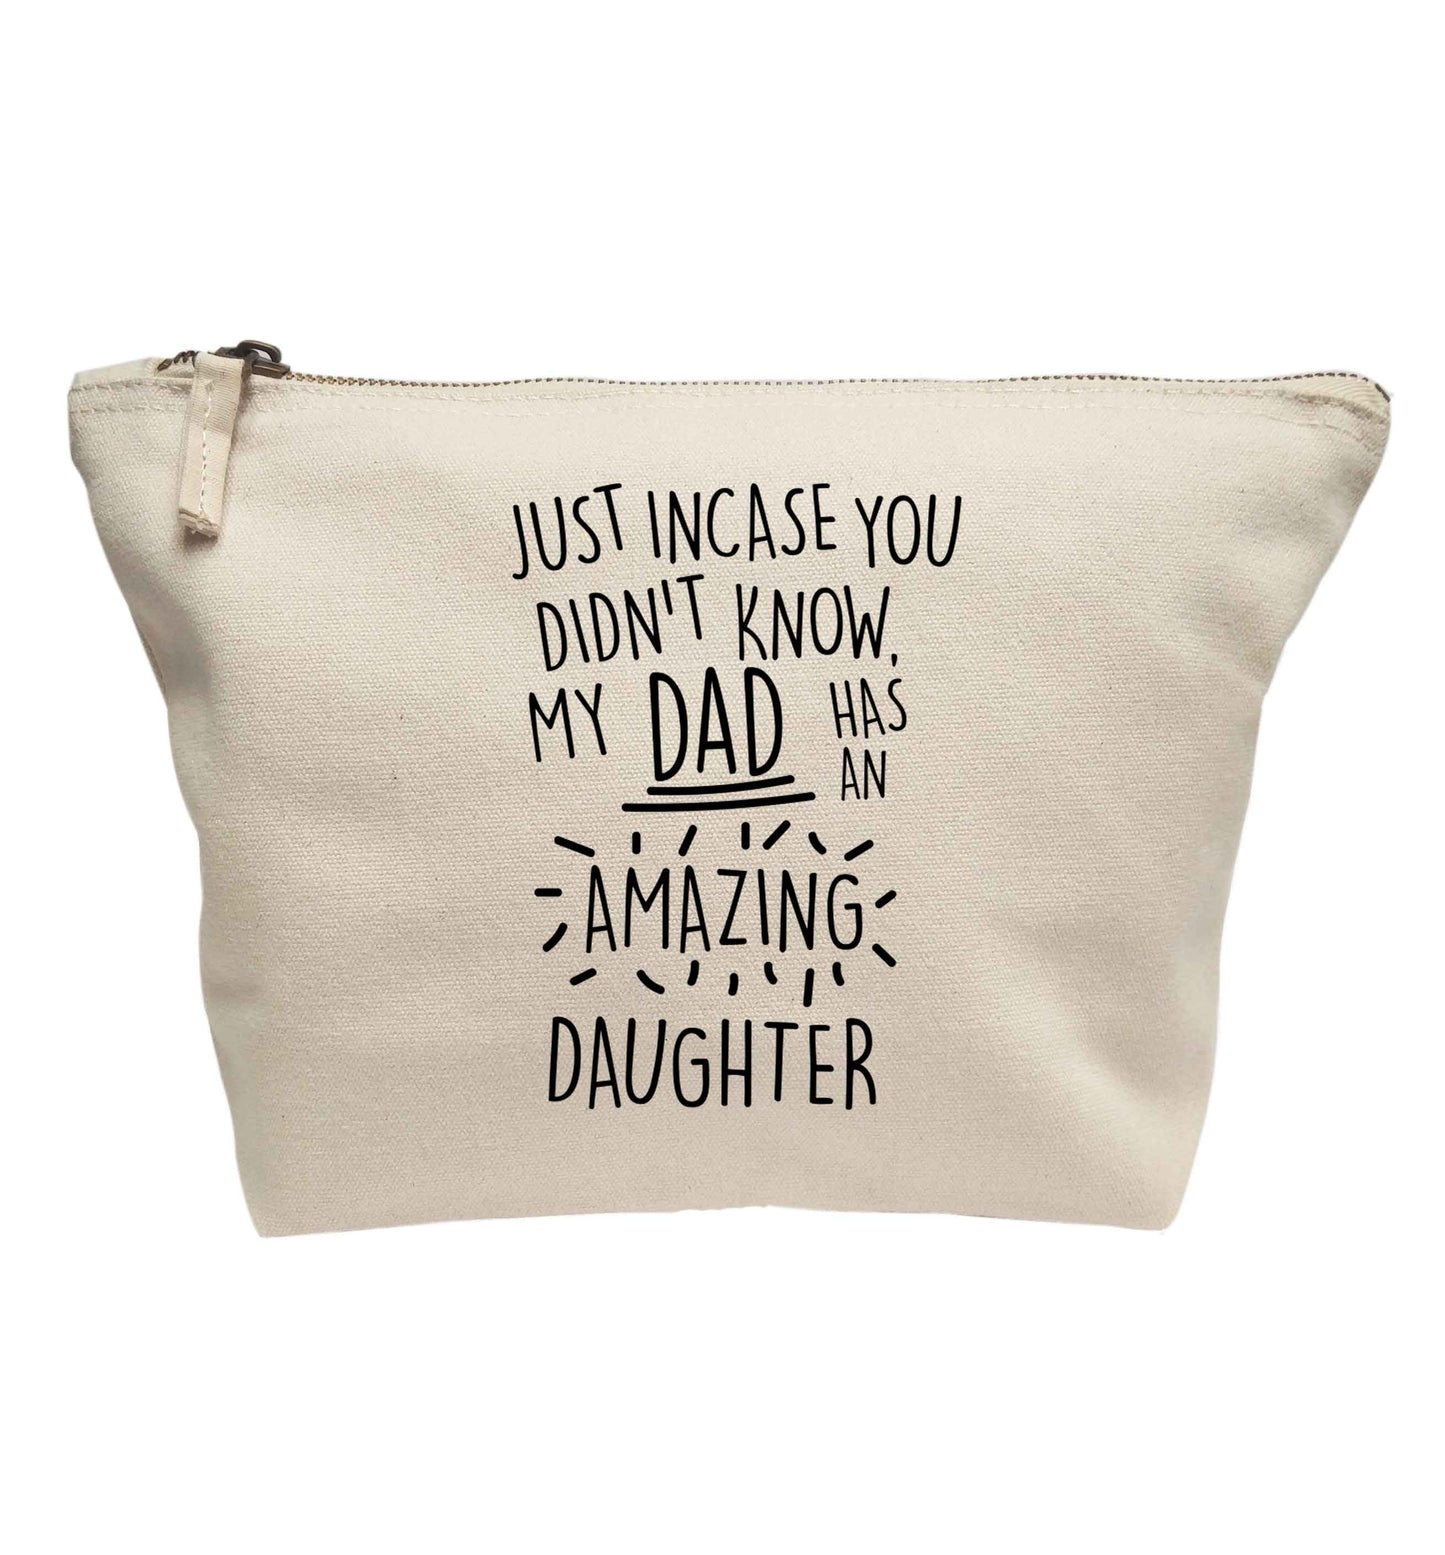 Just incase you didn't know my dad has an amazing daughter | Makeup / wash bag